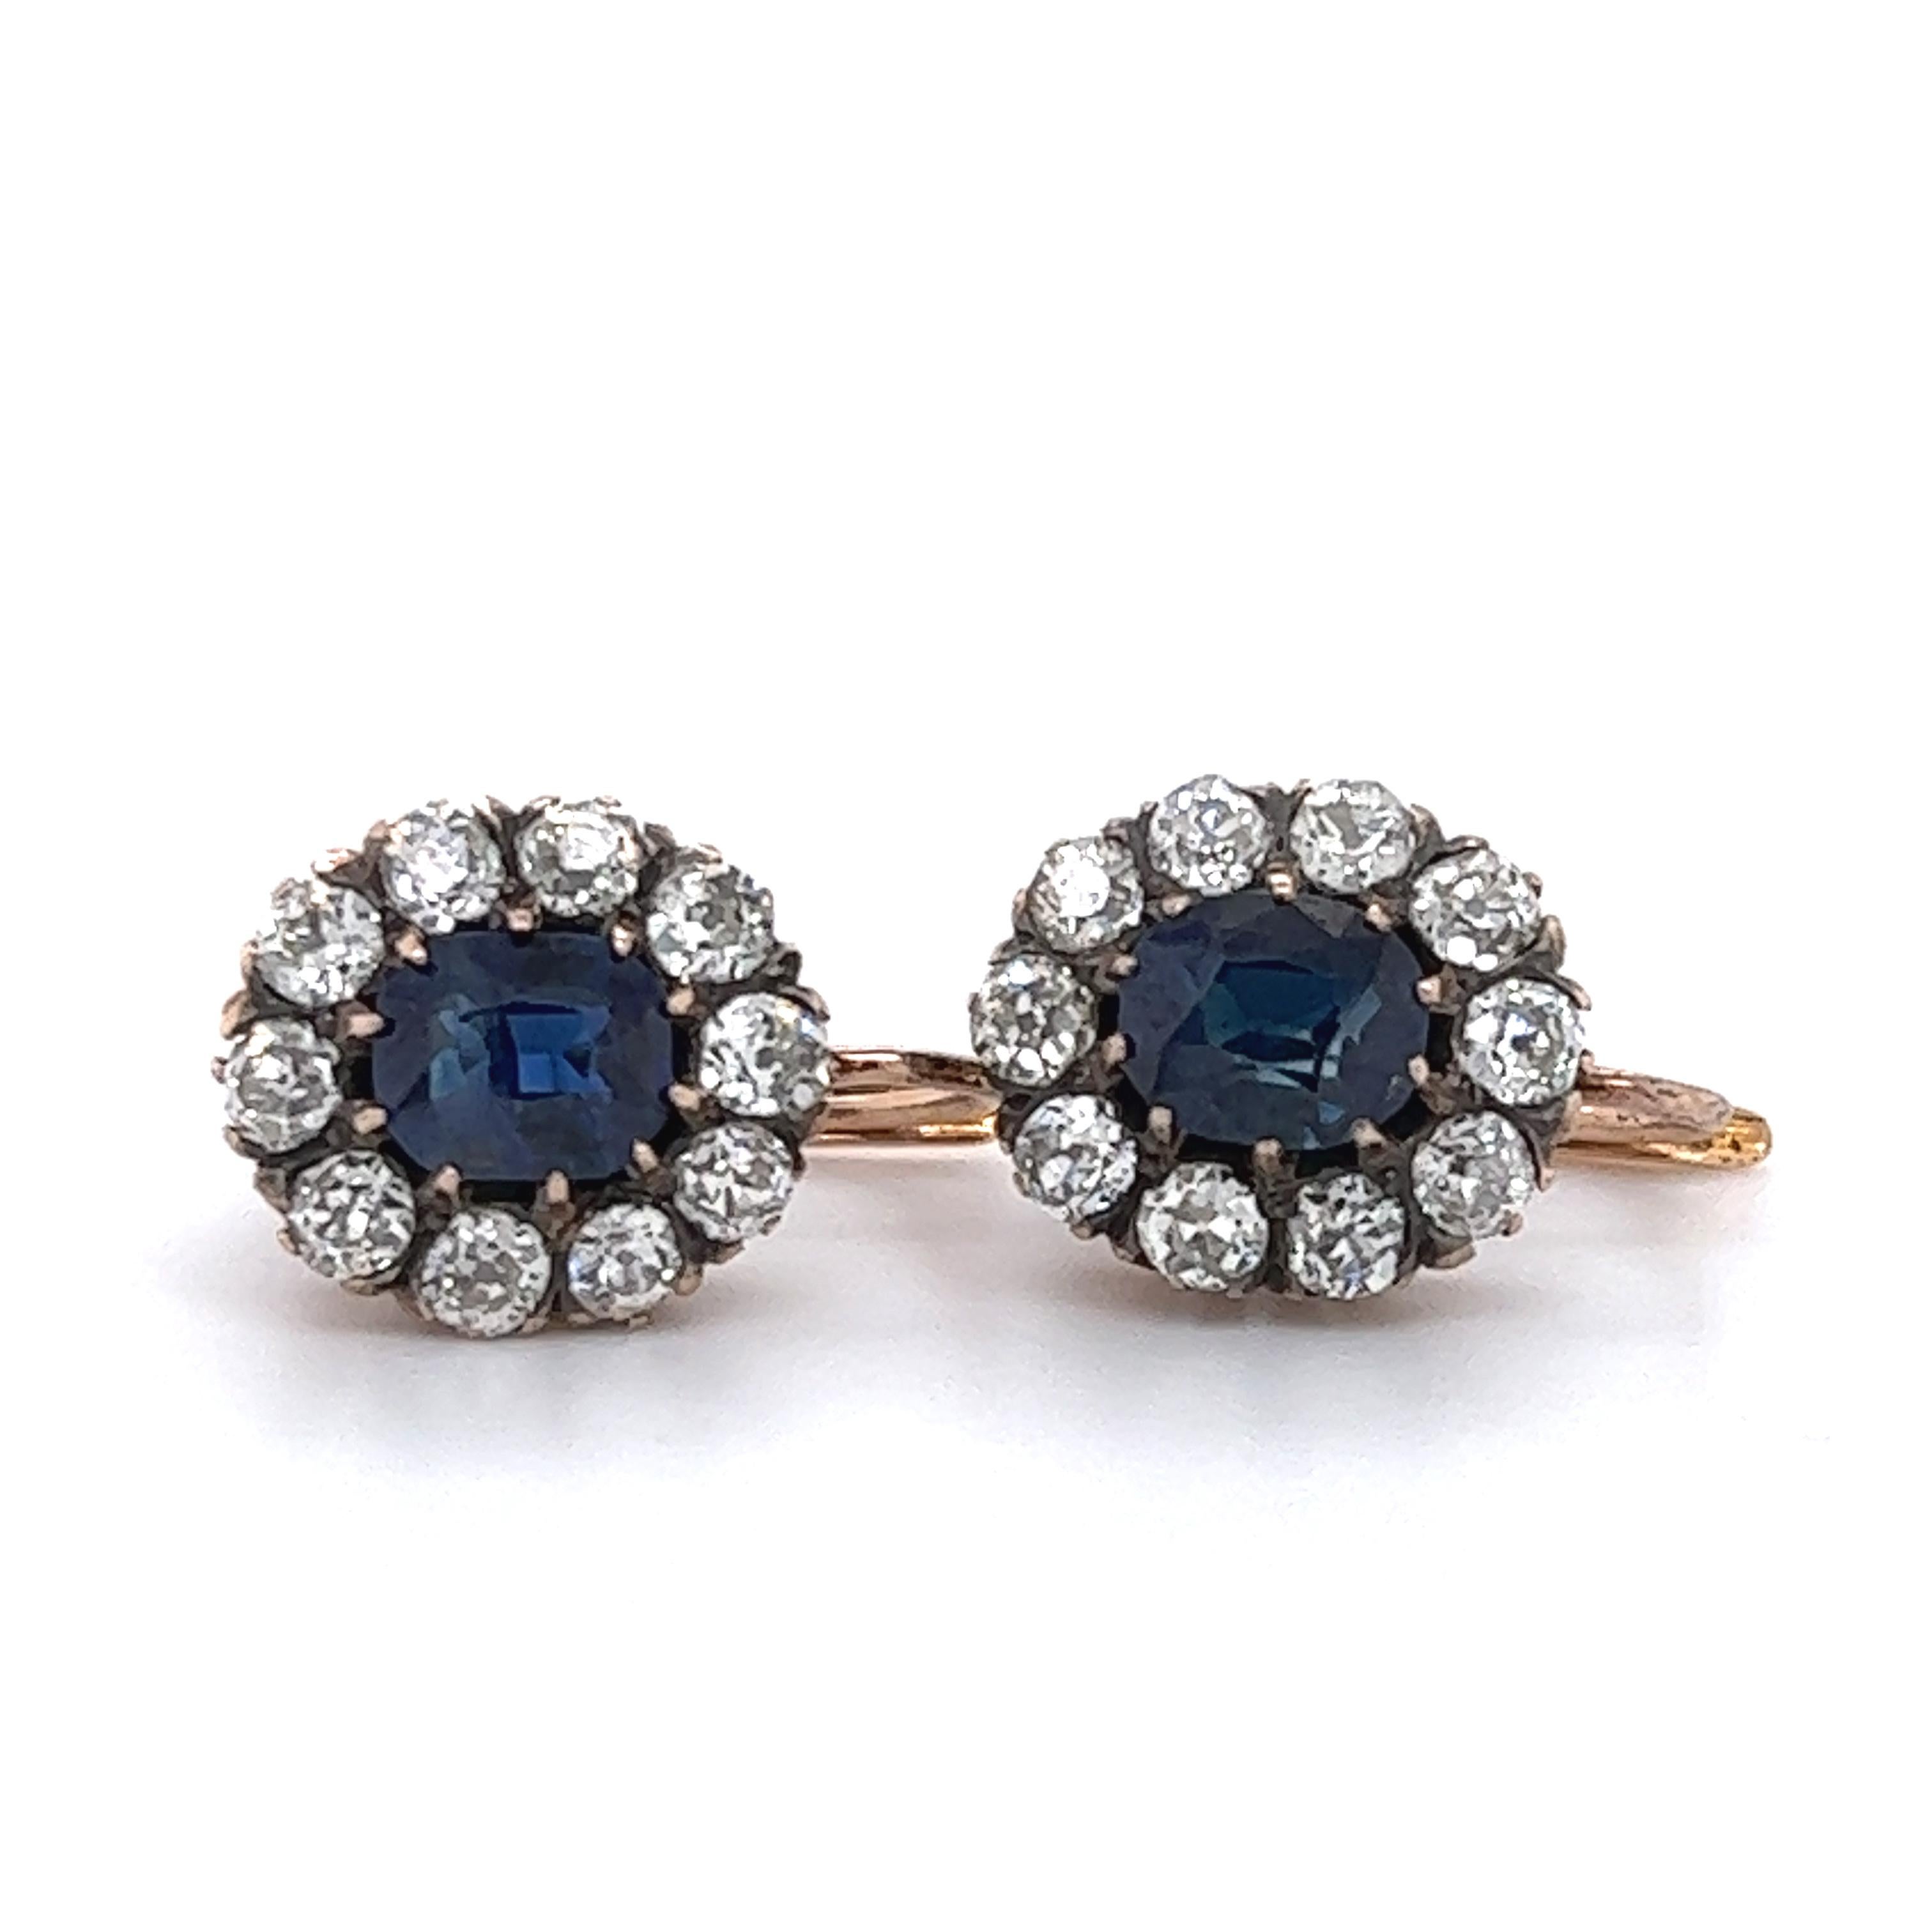 Beautiful design seen on these hand crafted sapphire and diamond dangling earrings. The earrings are crafted in 18k yellow gold and truly stand out as a Victorian classic. The earrings highlight two burmese sapphires. The sapphire's displays a rich